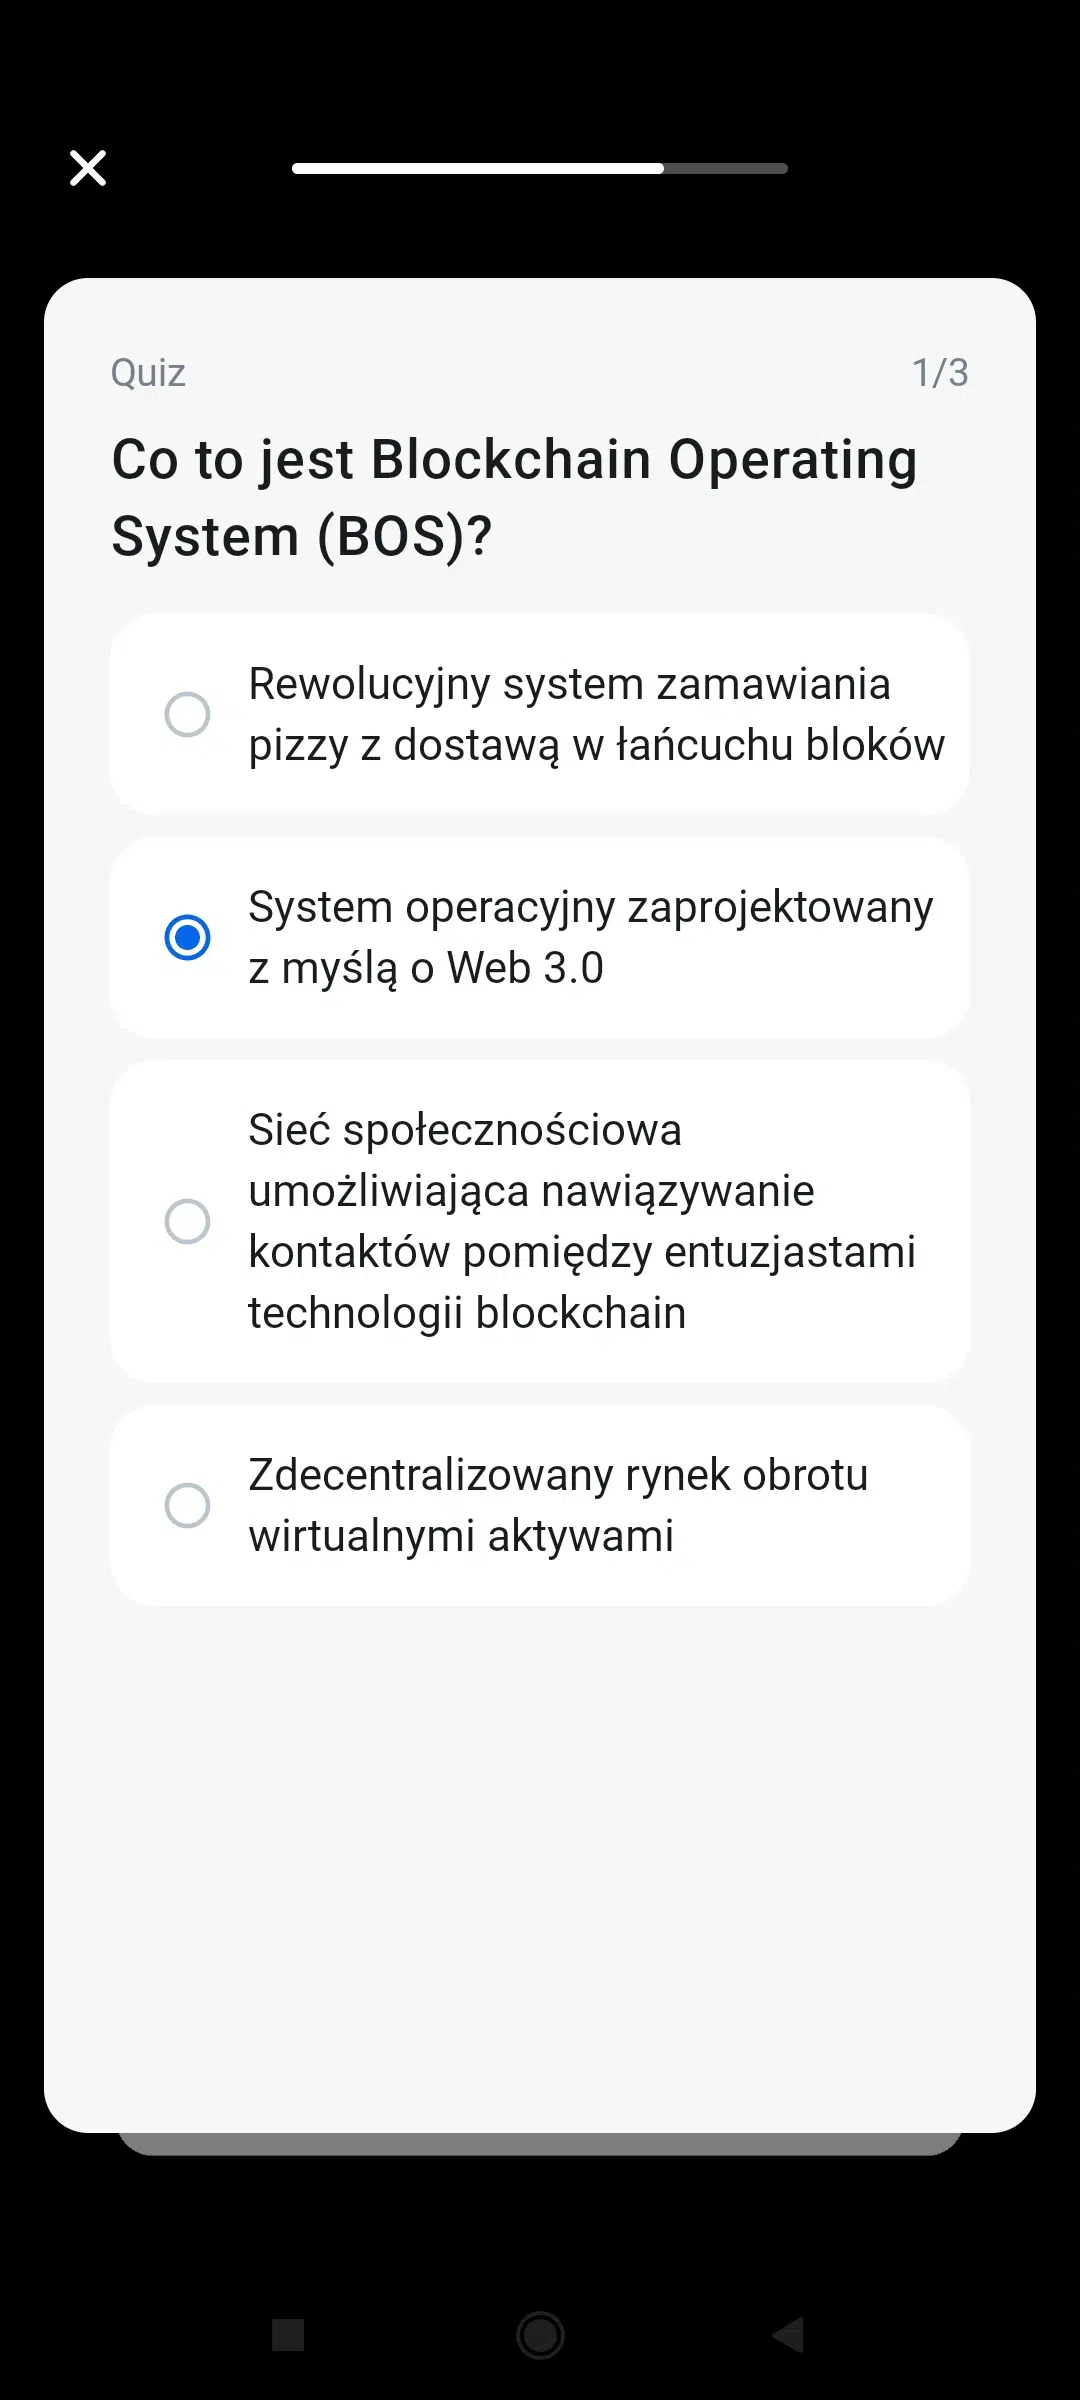 Co to jest Blockchain Operating System (BOS)?